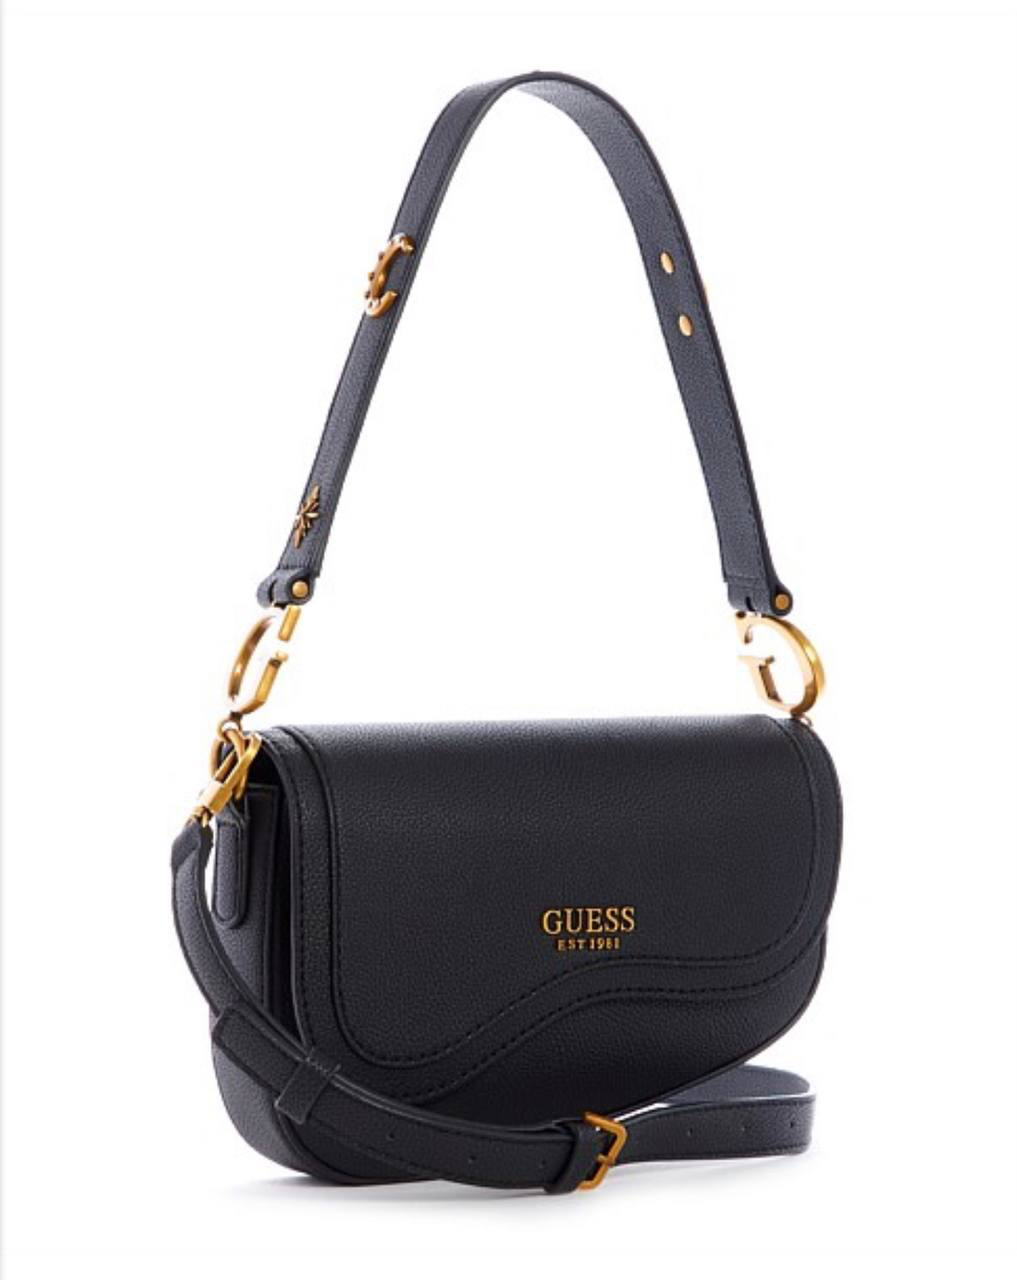 G by GUESS Women's Maelle Satchel | Accessorising - Brand Name / Designer  Handbags For Carry & Wear... Share If You Care! | Guess bags, Satchel,  Purses and bags